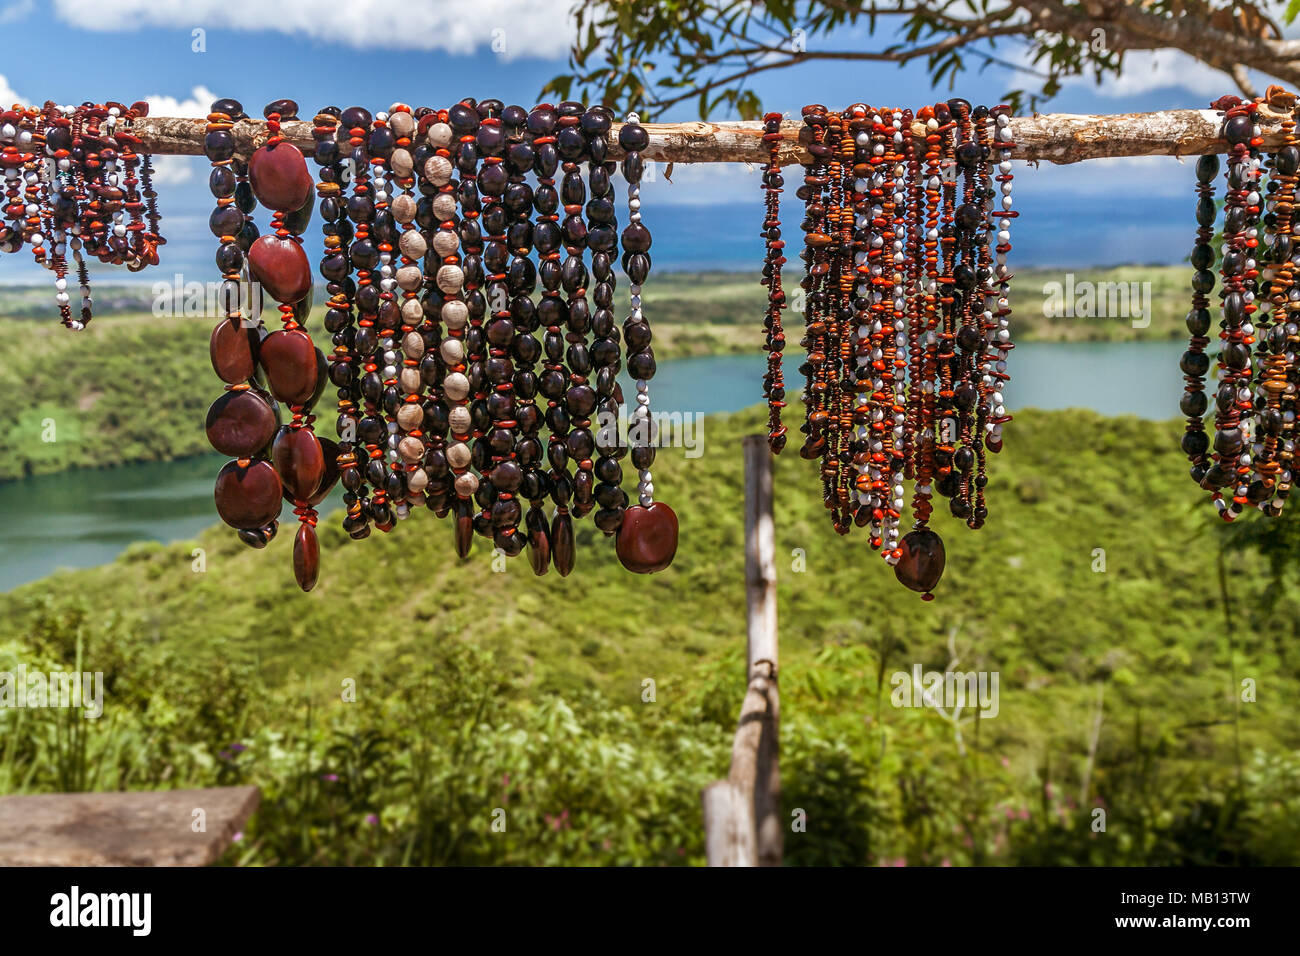 Selling necklaces of seeds in Nosy Be island, northern Madagascar Stock Photo